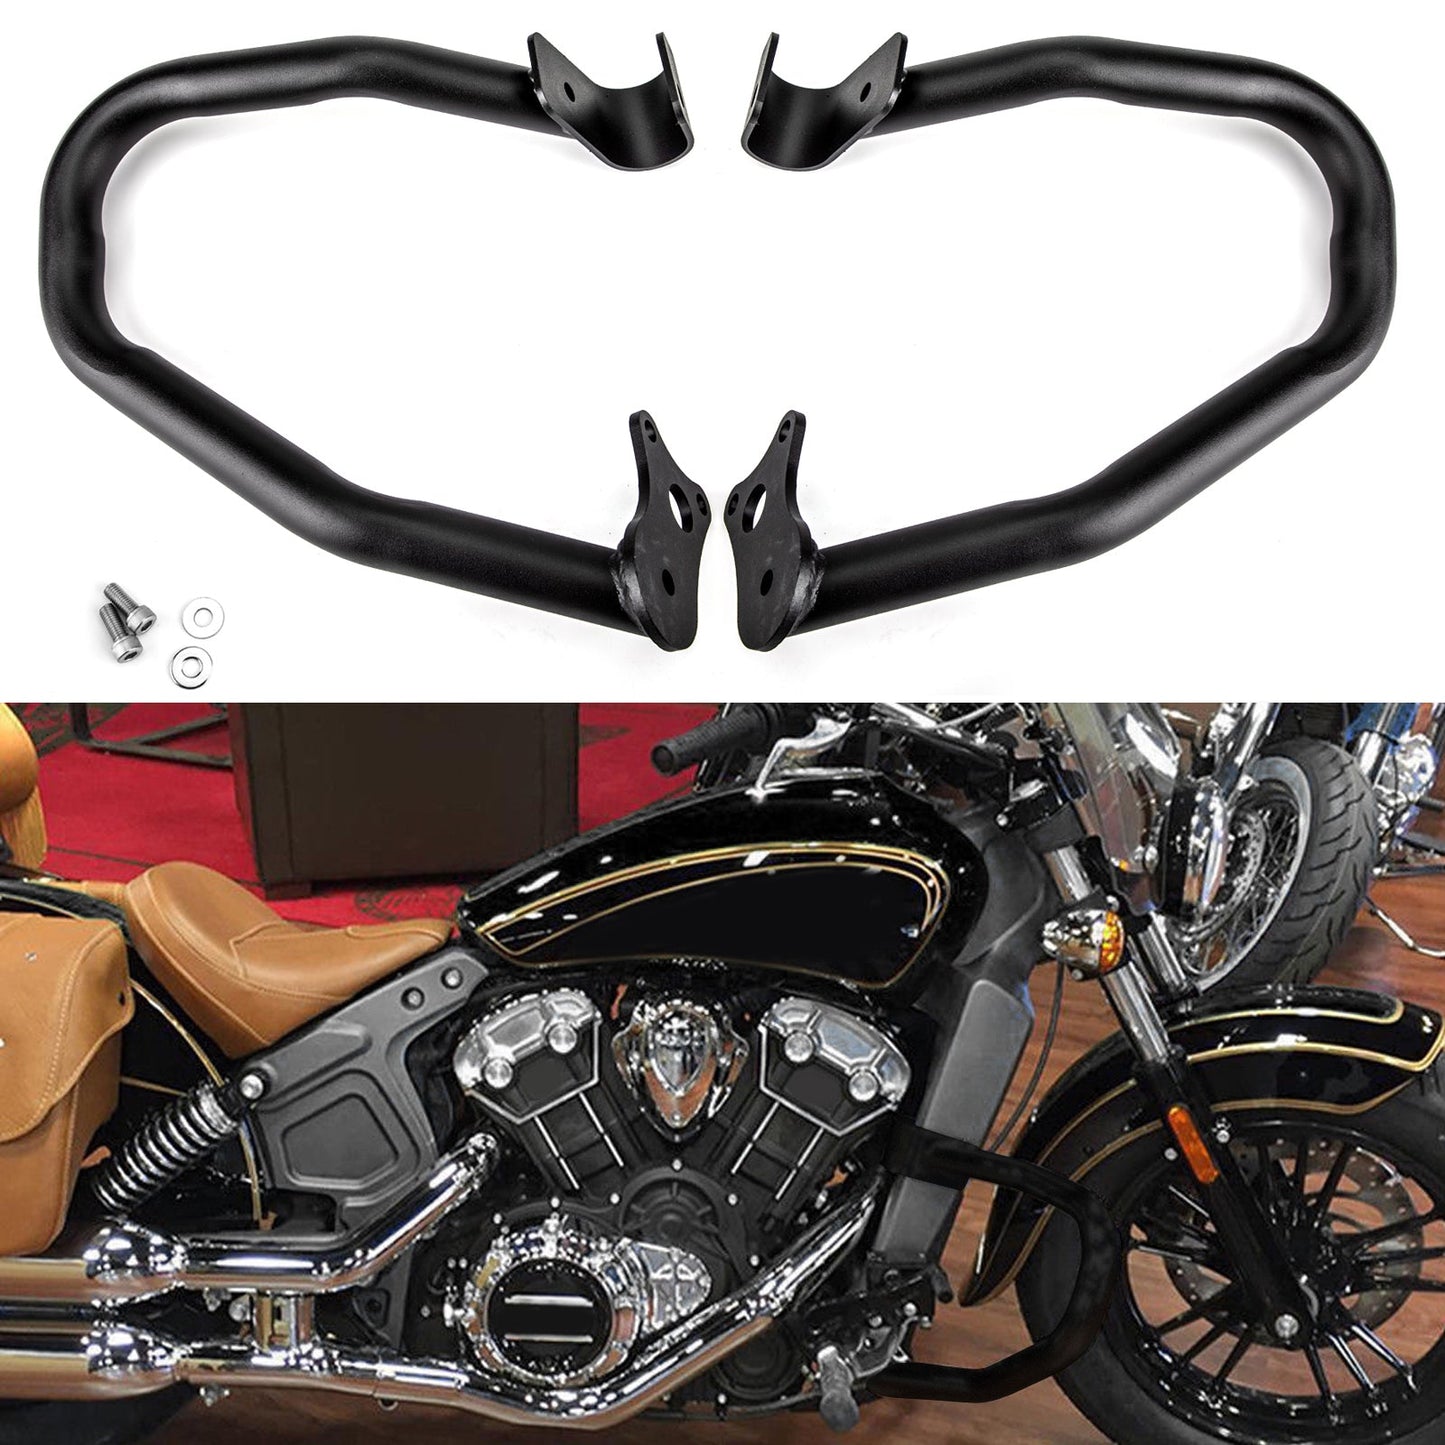 2016-2018 Indian Scout Sixty New Reliable Engine Guard Highway Crash Bars